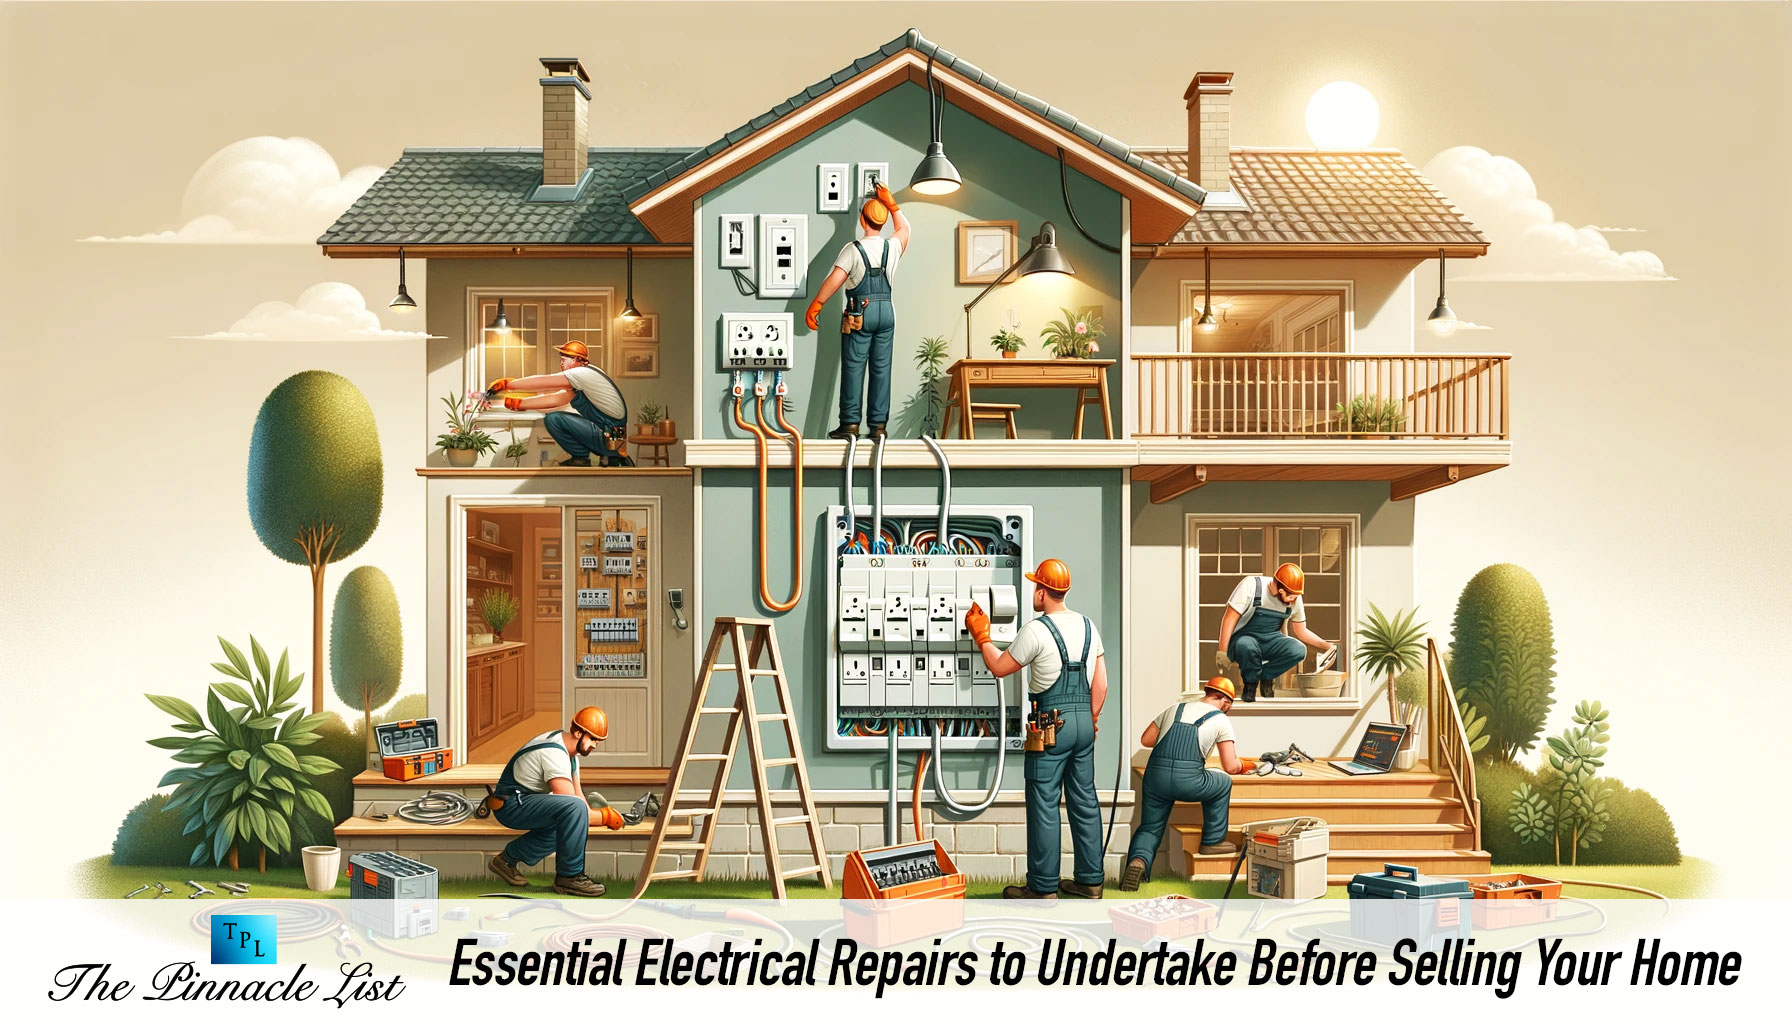 Essential Electrical Repairs to Undertake Before Selling Your Home